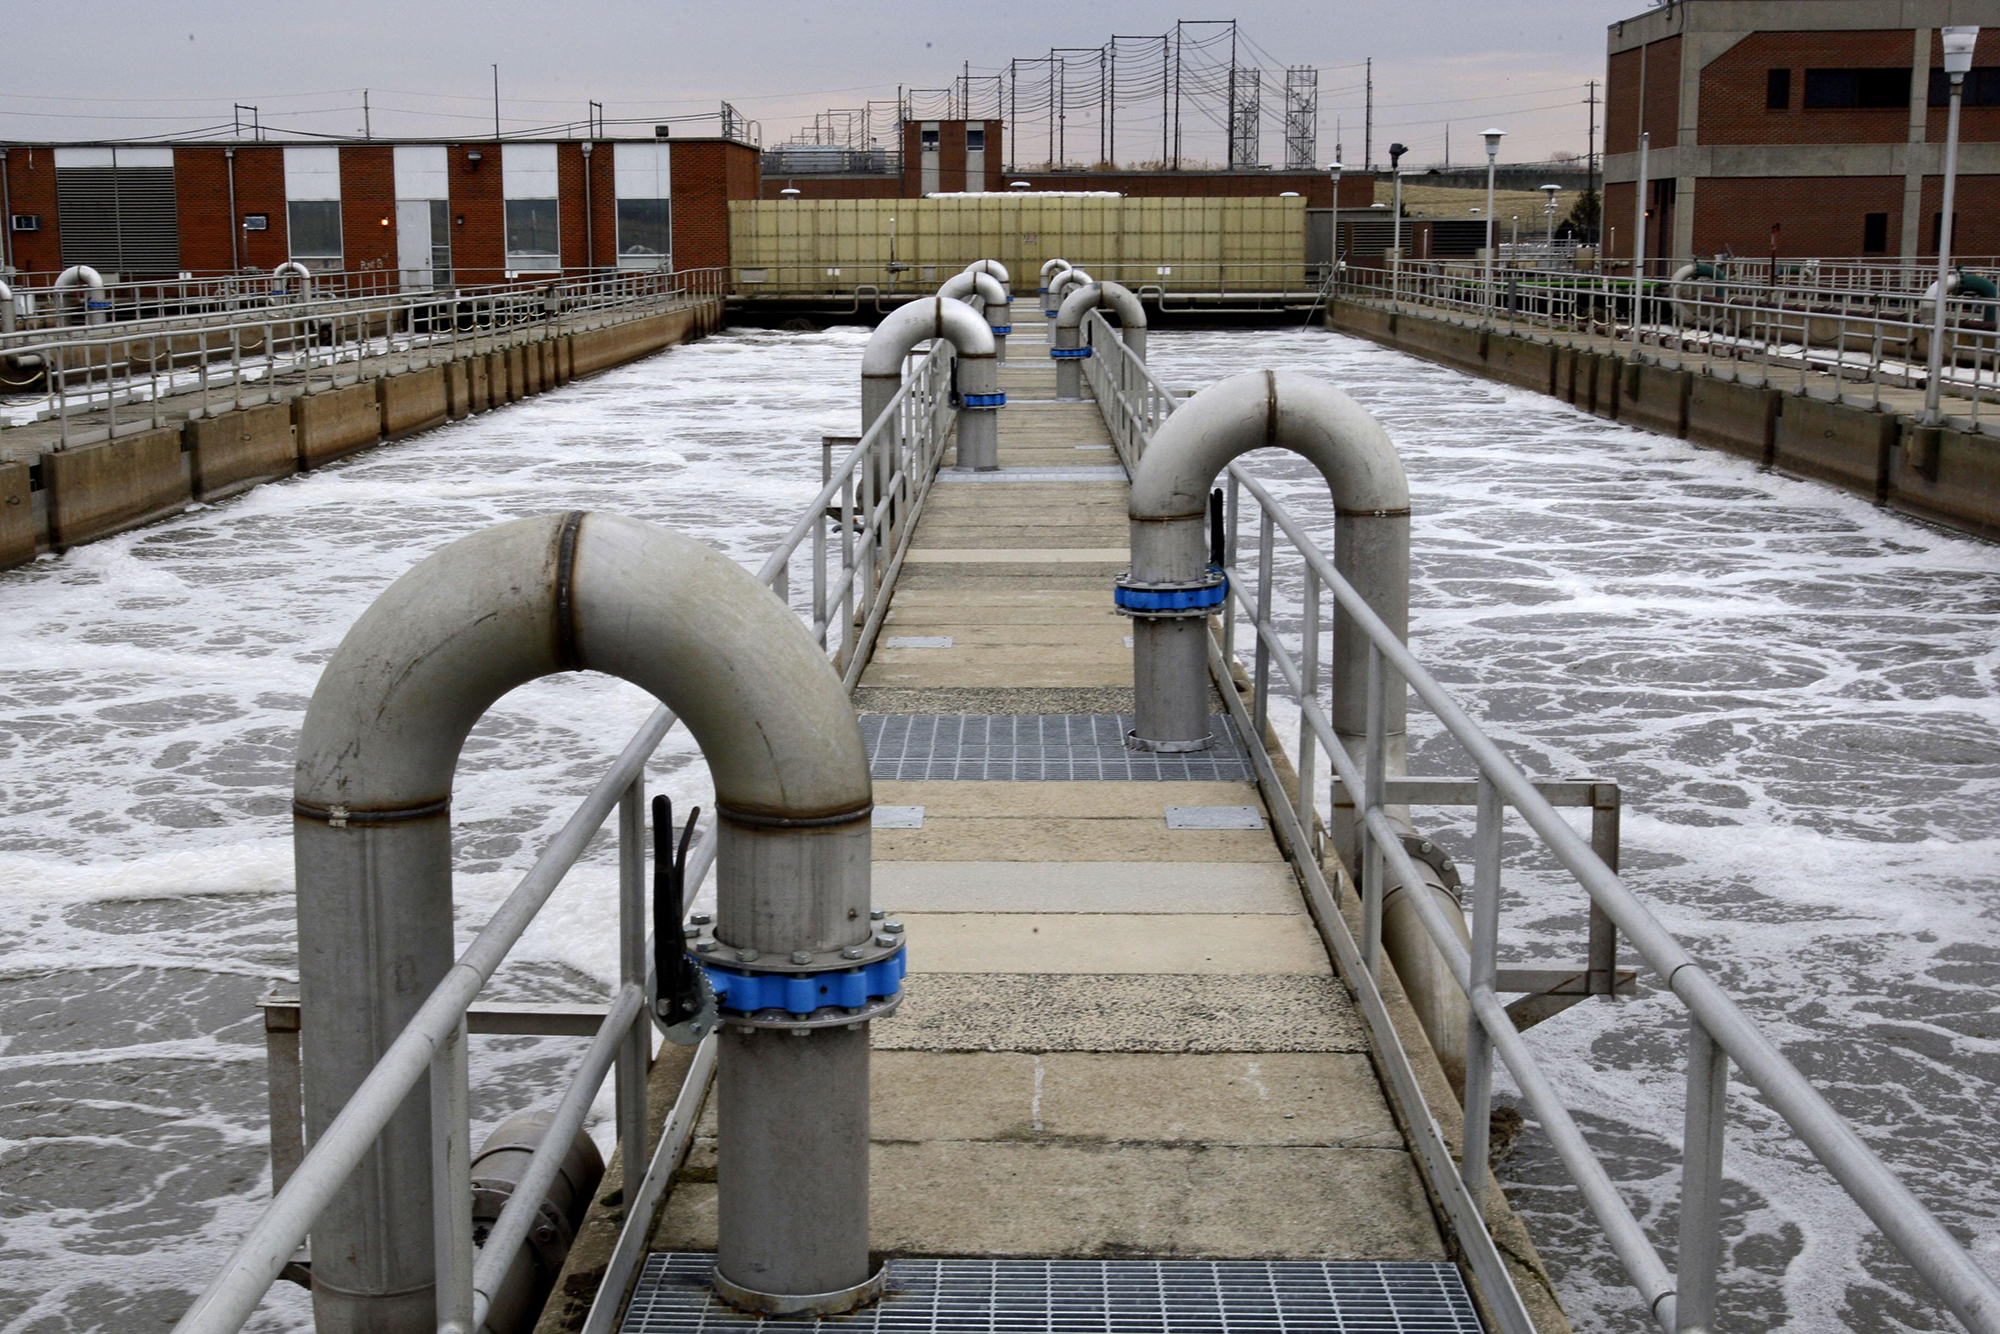 Aeration basins at the Wilmington Wastewater Treatment Plant